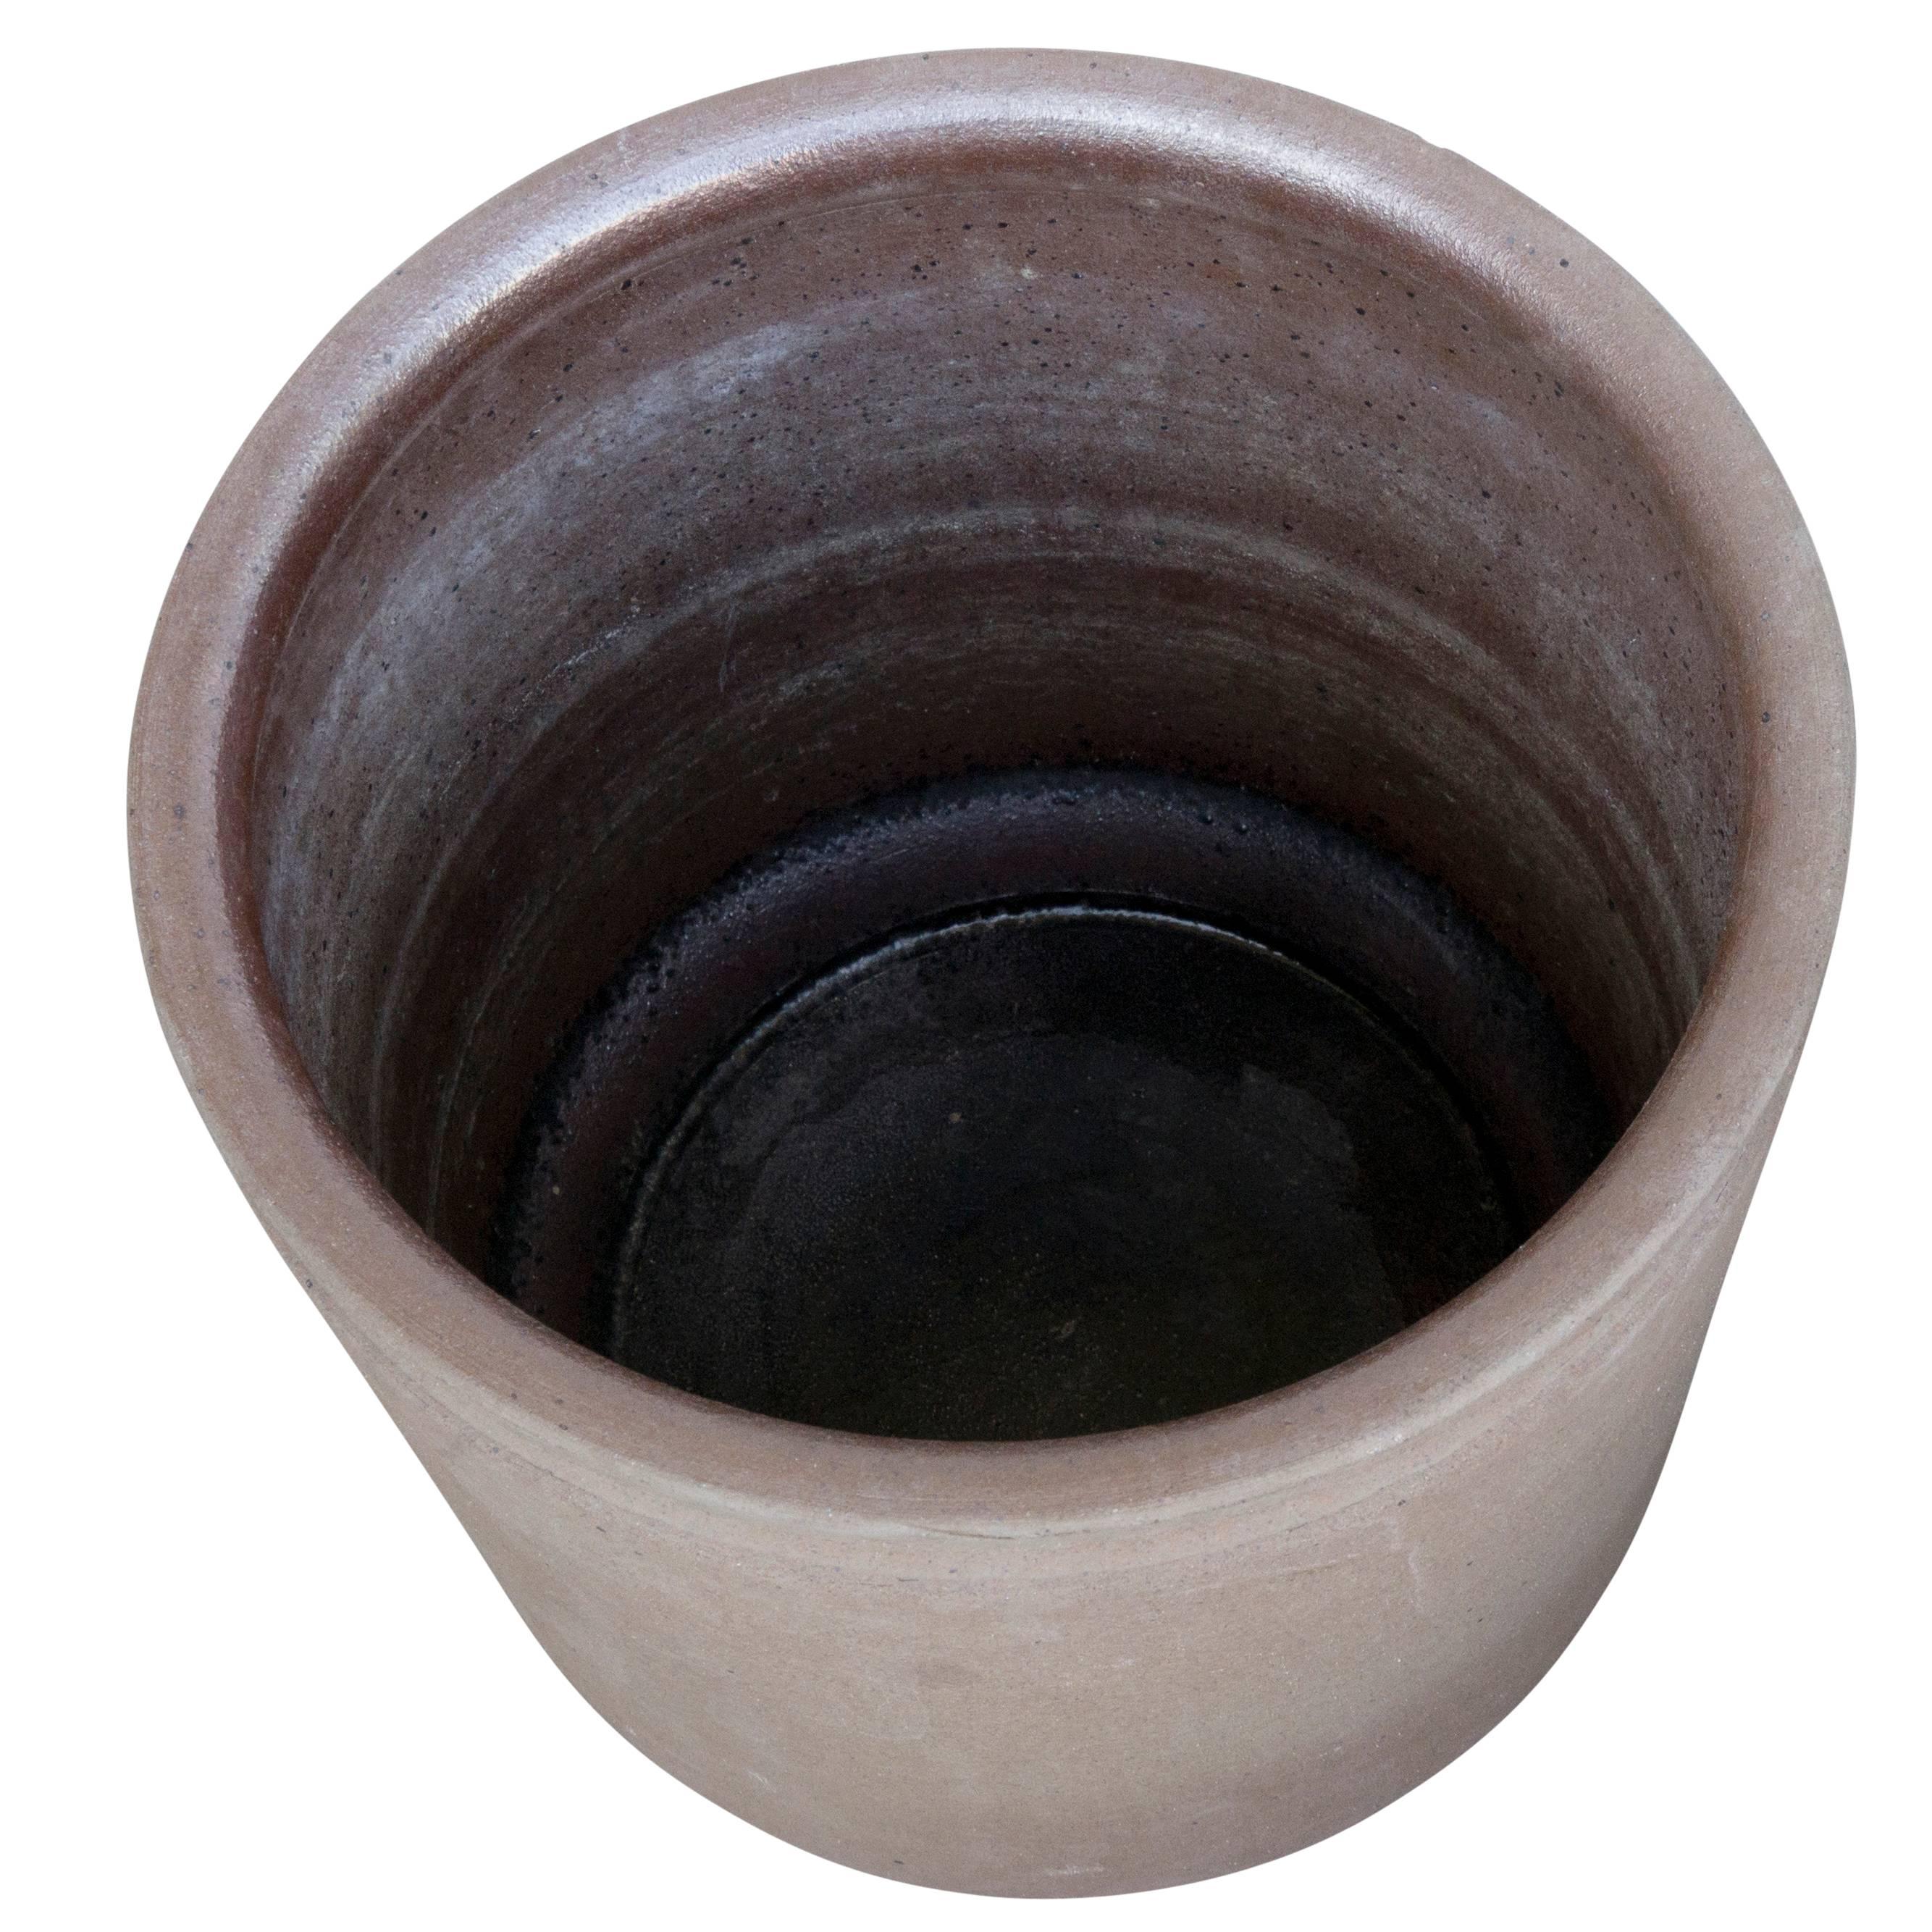 Robert Maxwell style vessel as seen in the signature incised top rim. Earthgender known for its warm deep earth-tones is a great addition to most interior and exterior design styles, combining natural colors with modern techniques of pottery